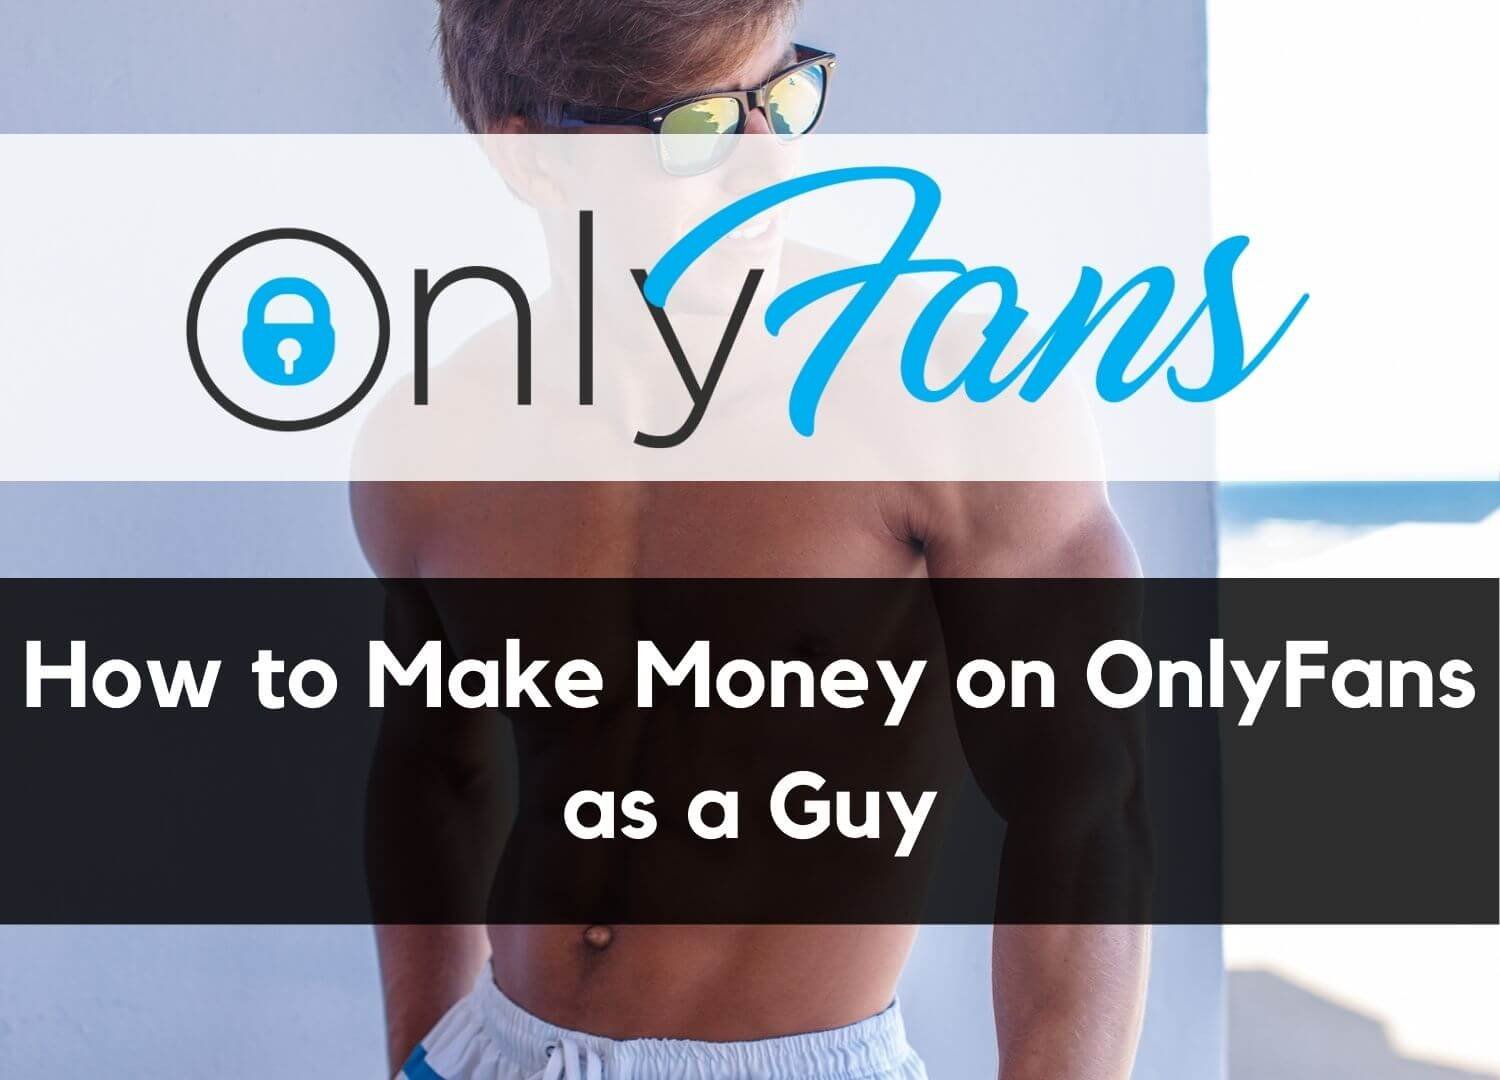 Can man make money on onlyfans